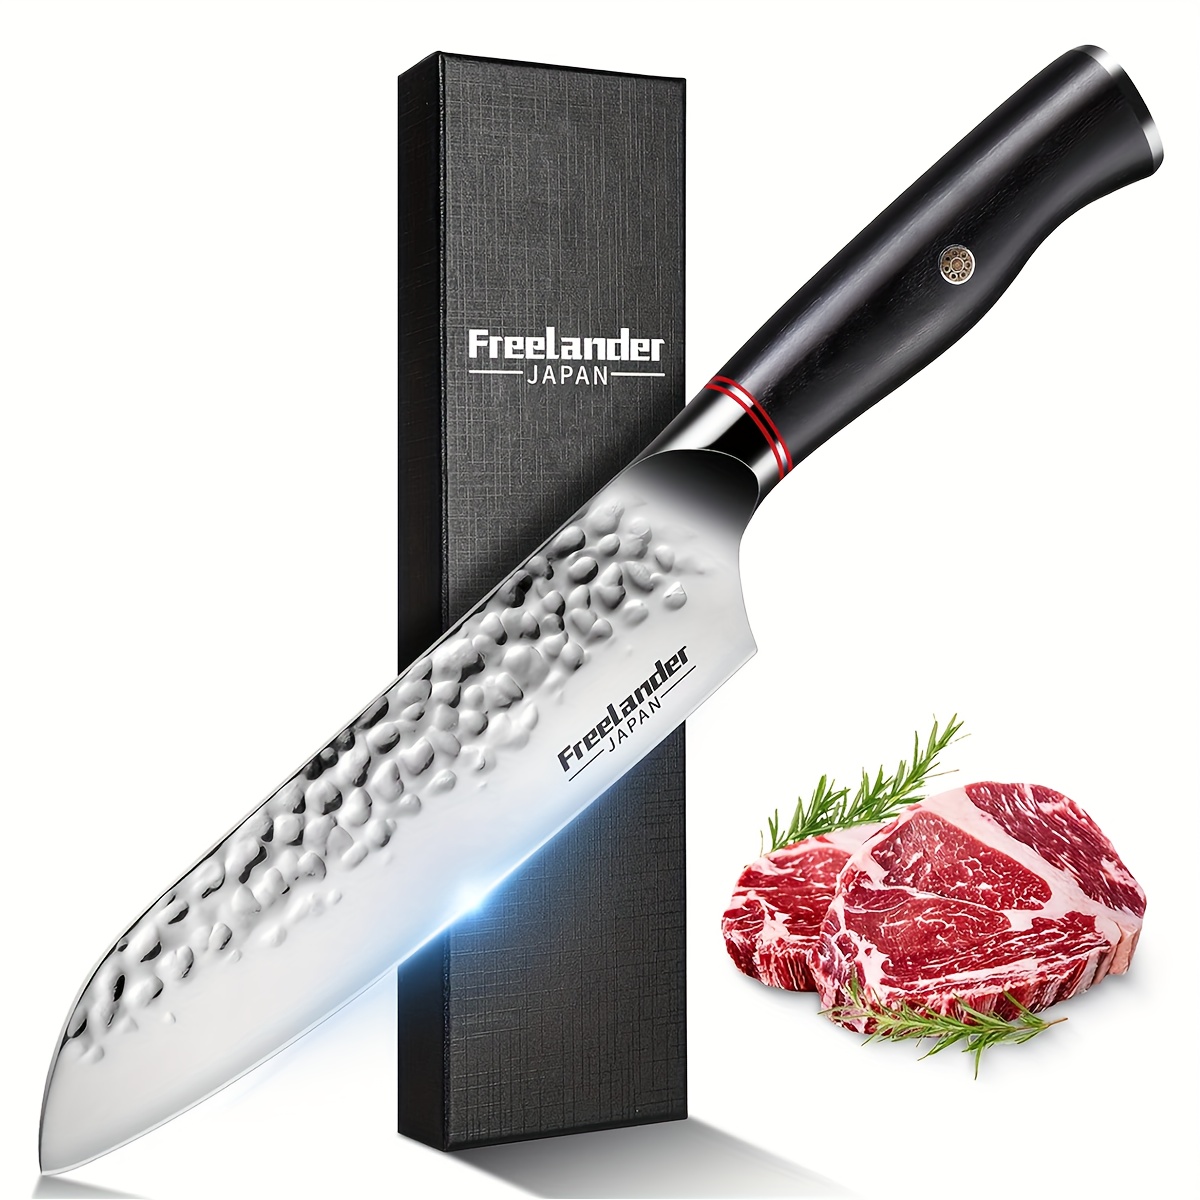 

7" Chef Knife, Ultra Sharp Japanese Kitchen Knives, Santoku Knife Hand Forged Quality Stainless, Knife For Meat Vegetable Fruit With Ergonomic Pakkawood Handle And Gift Box Set